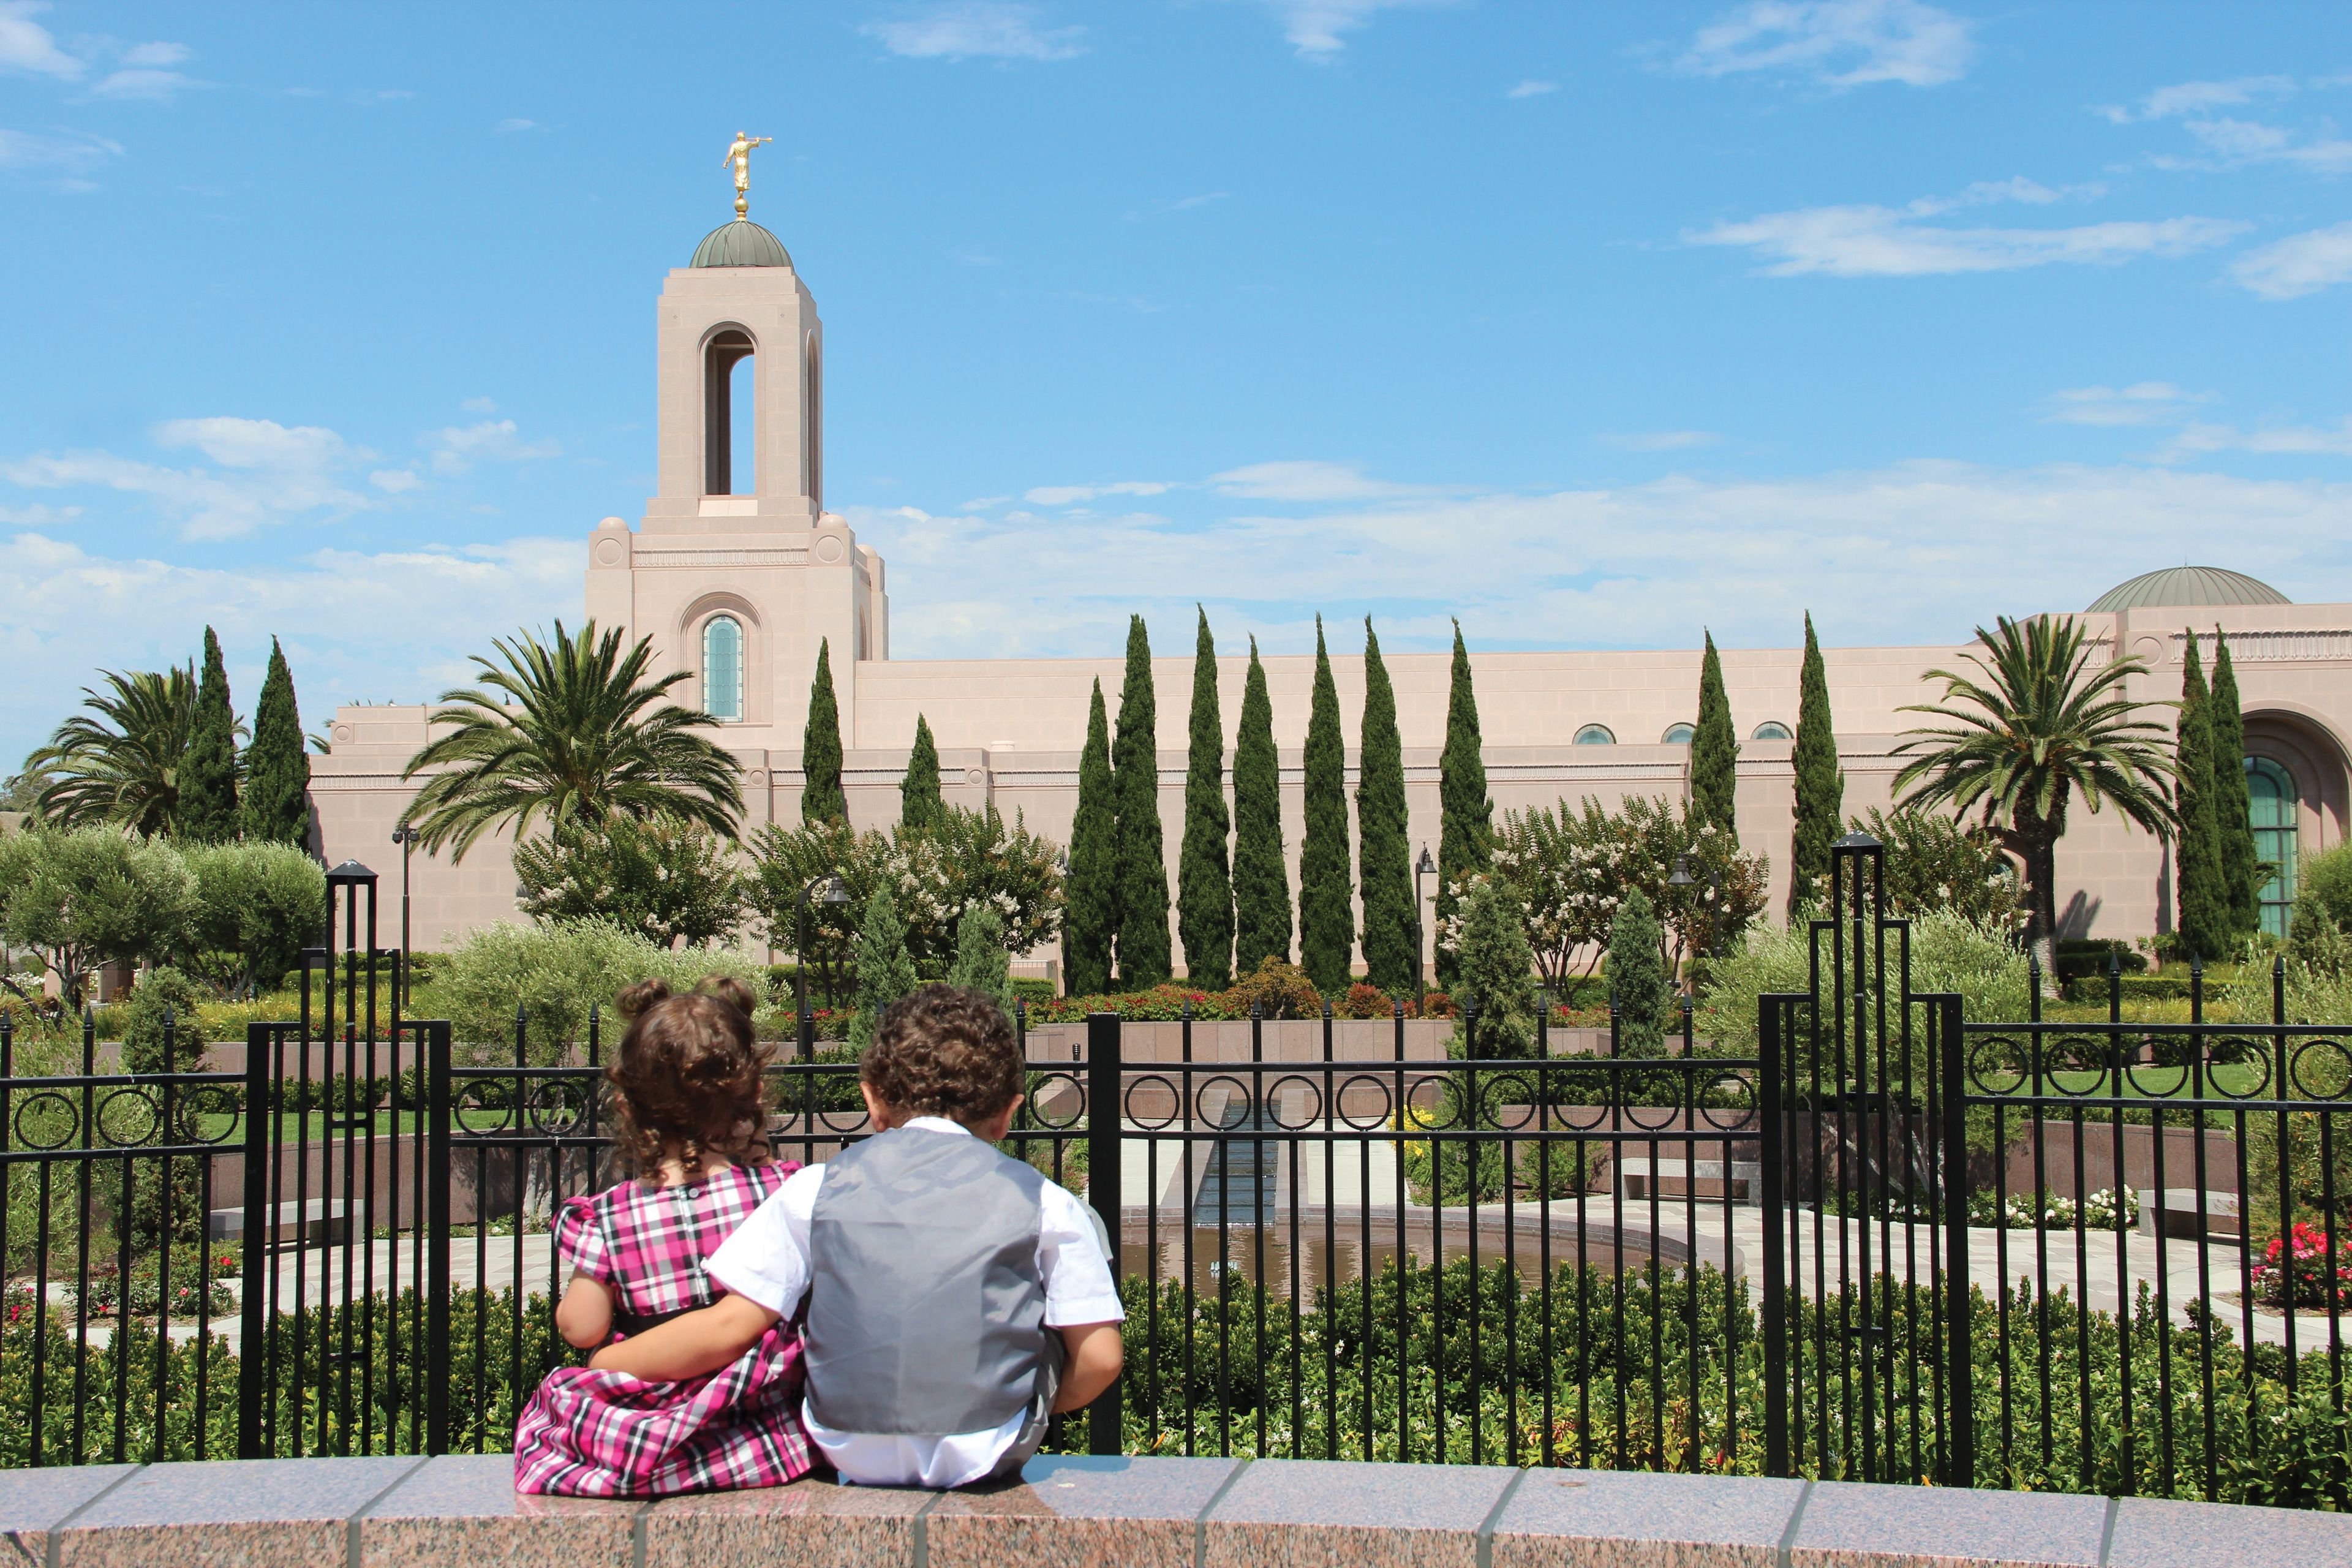 A little boy sitting next to his sister, looking at the Newport Beach California Temple.